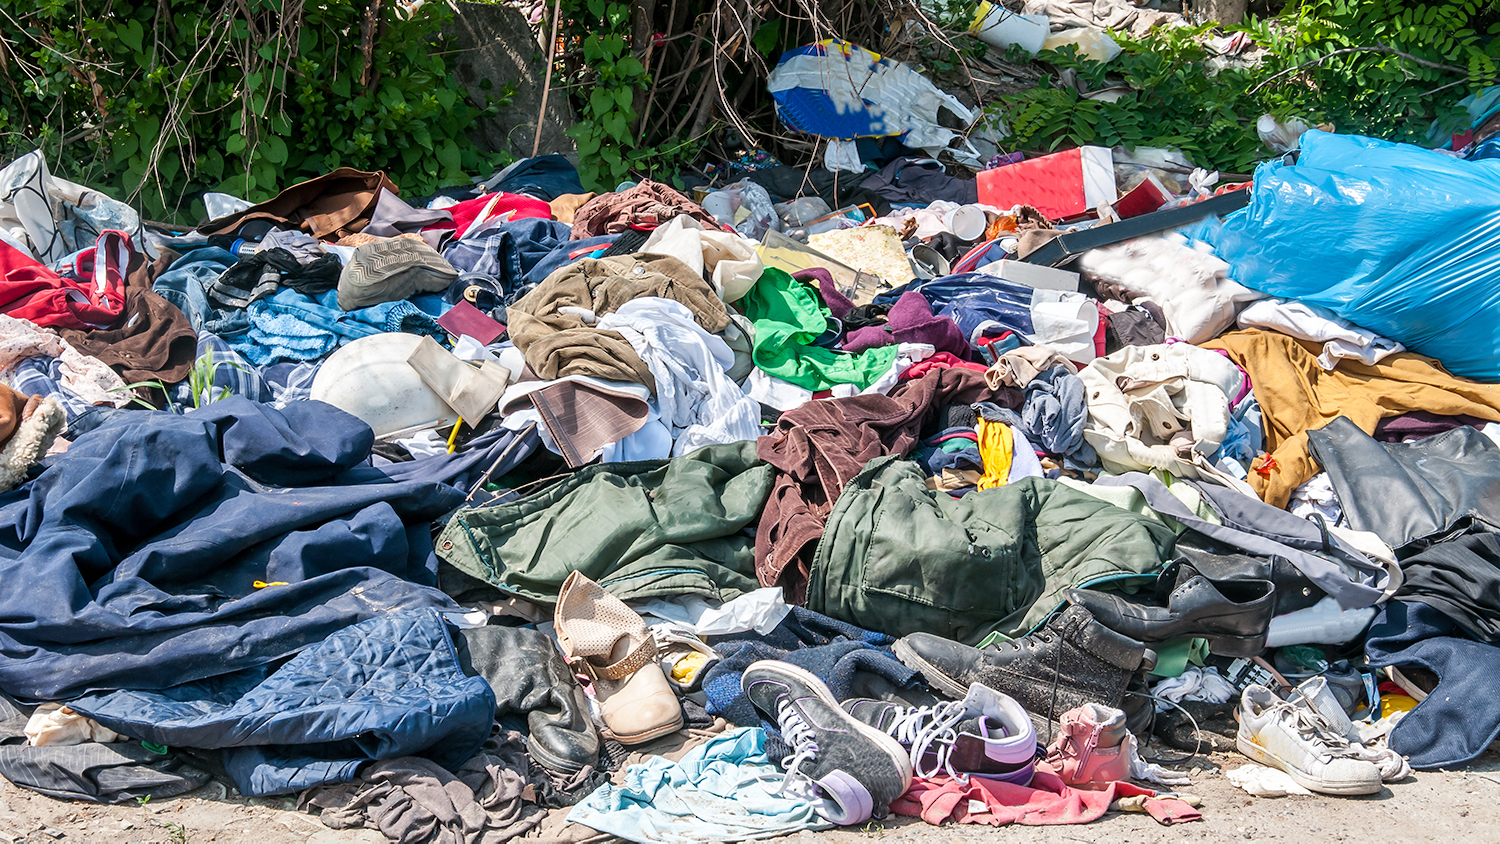 A pile of used clothing - Our Clothes Are Polluting the Environment. Here's a Solution - Forest Biomaterials NC State University